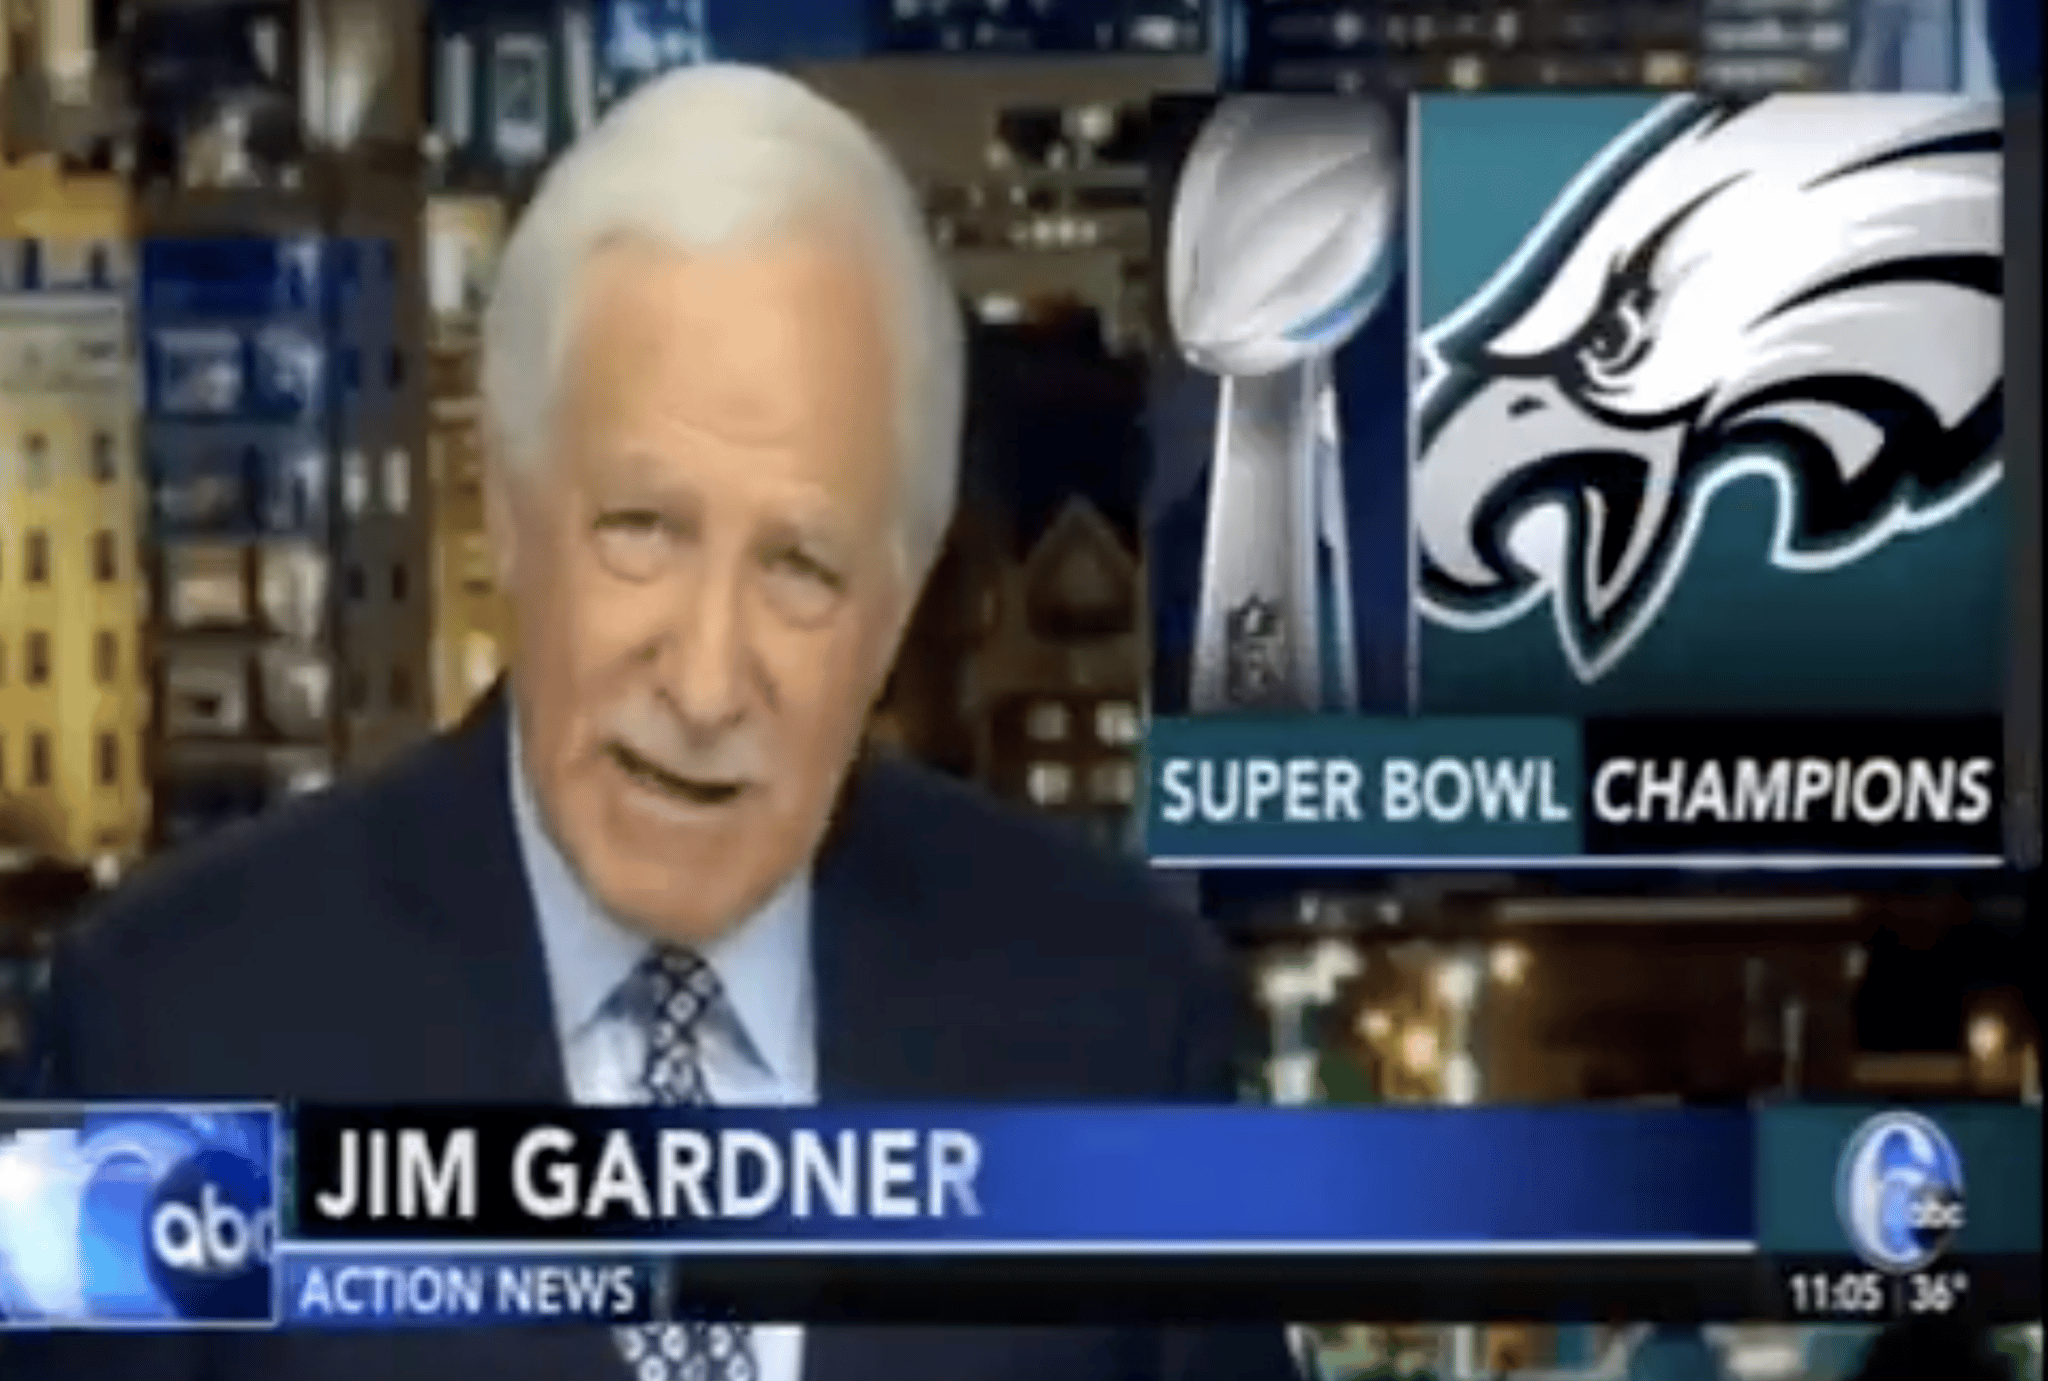 But the Big Story on Action News is a Tailgate Planned for Jim Gardner’s Final Newscast